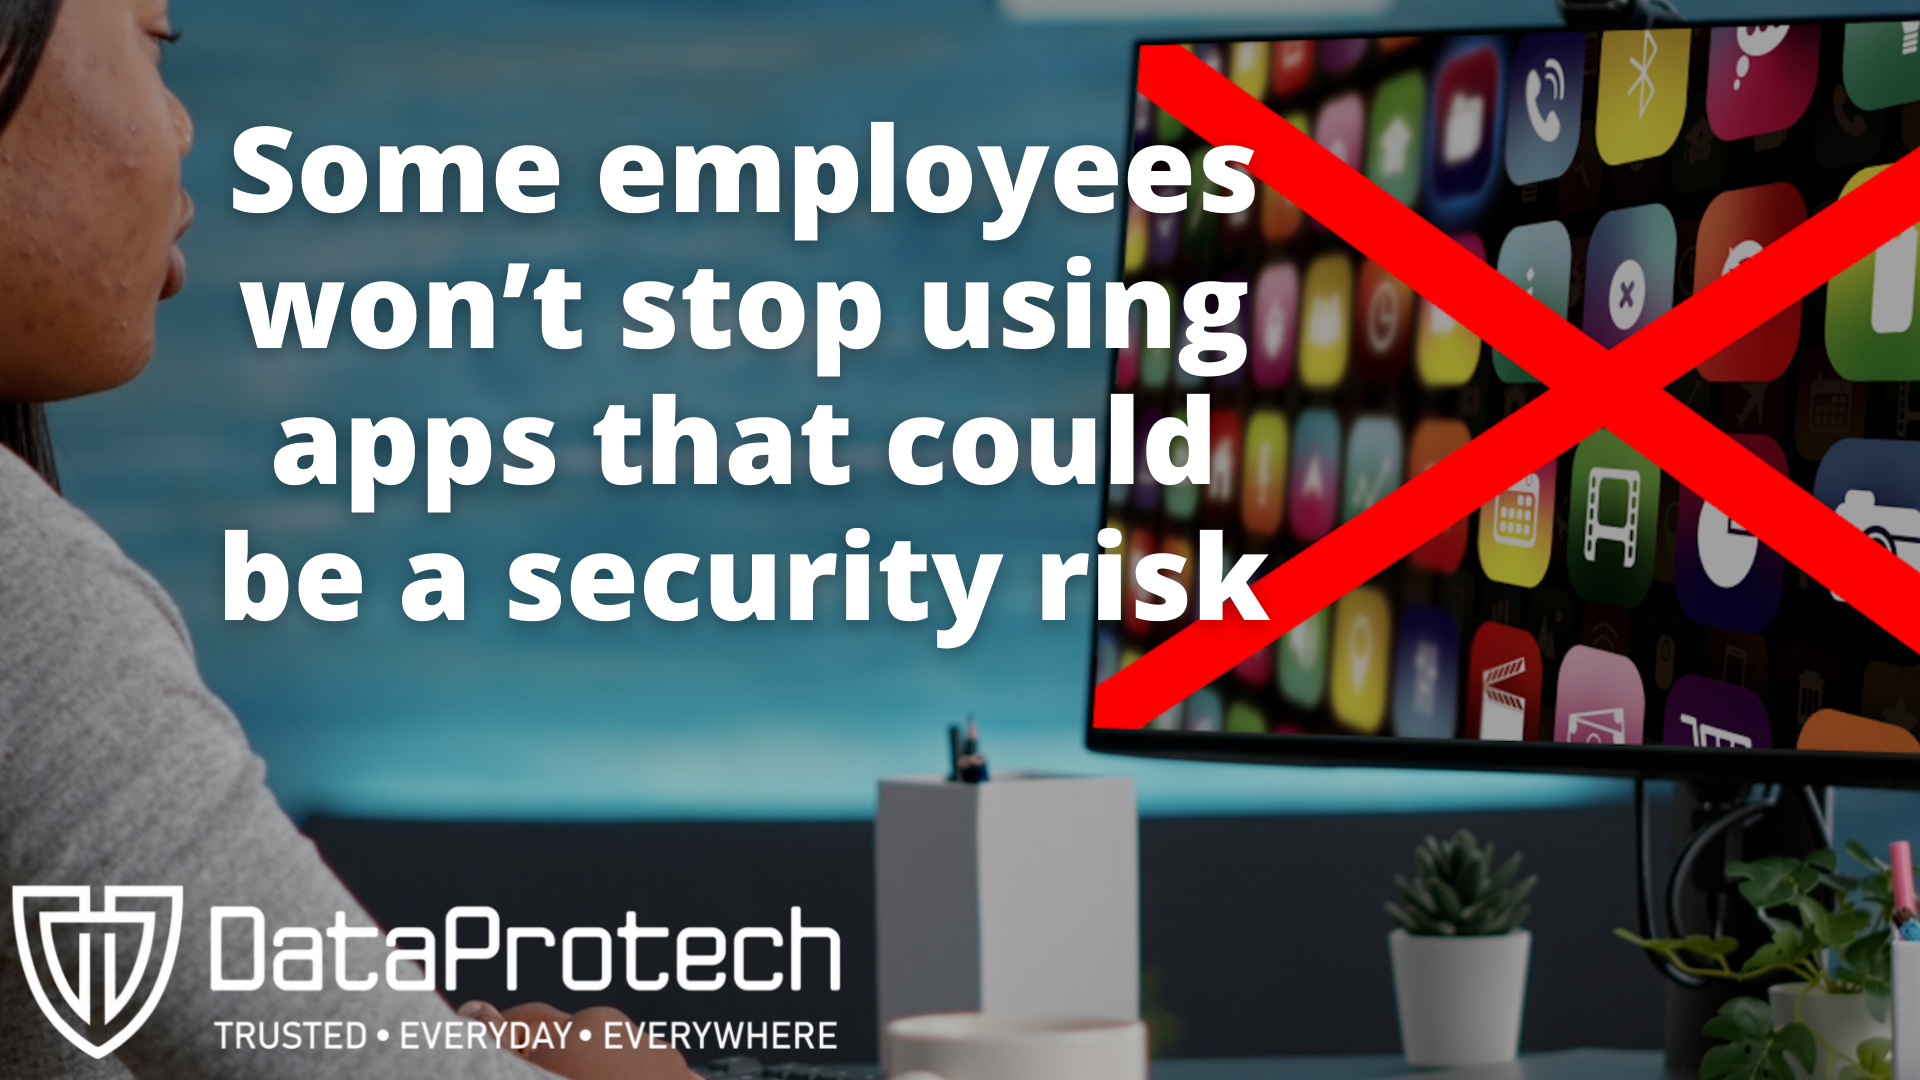 Some employees won’t stop using apps that could be a security risk